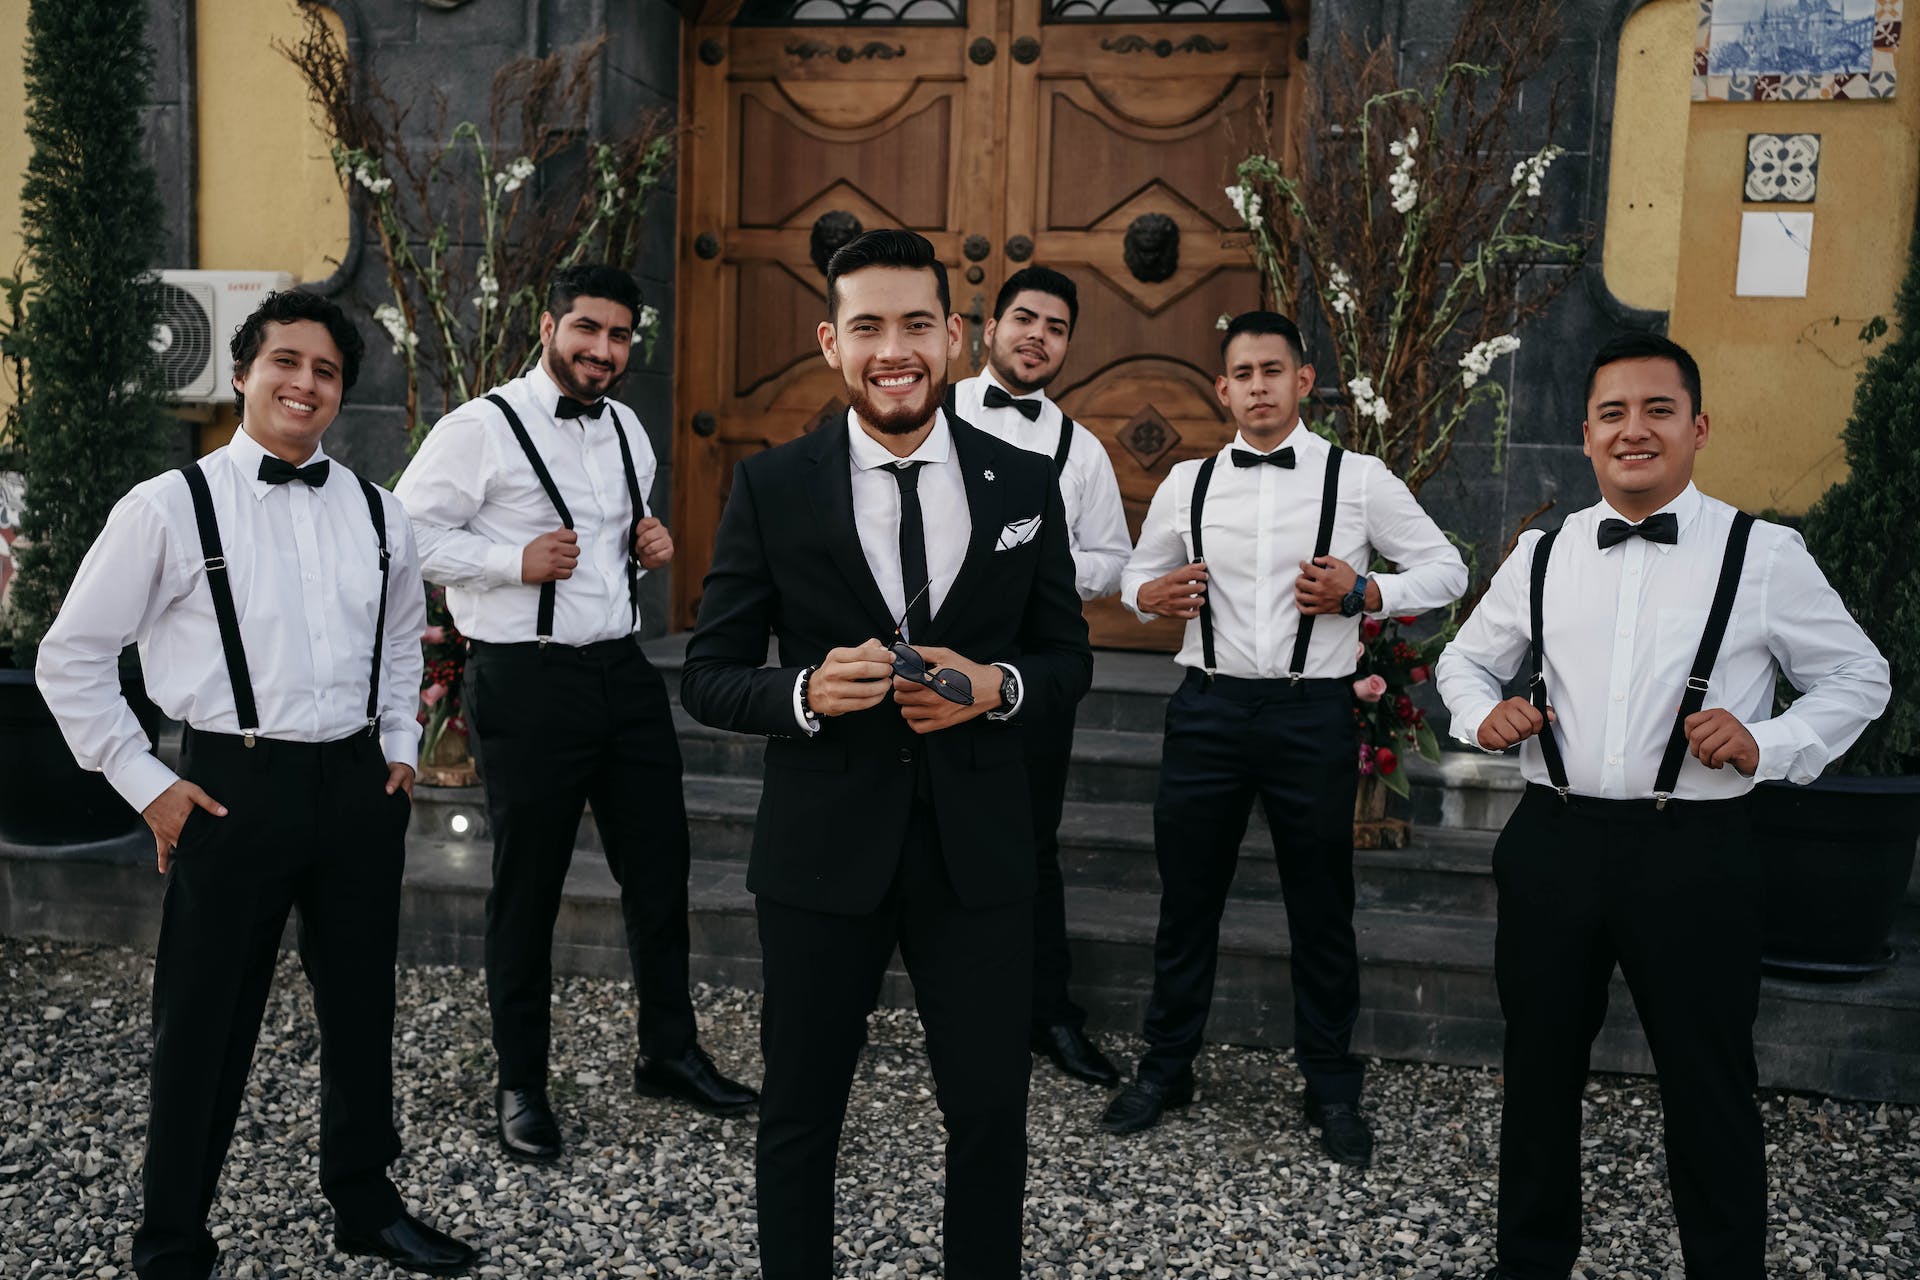 A man standing with his groomsmen | Source: Pexels